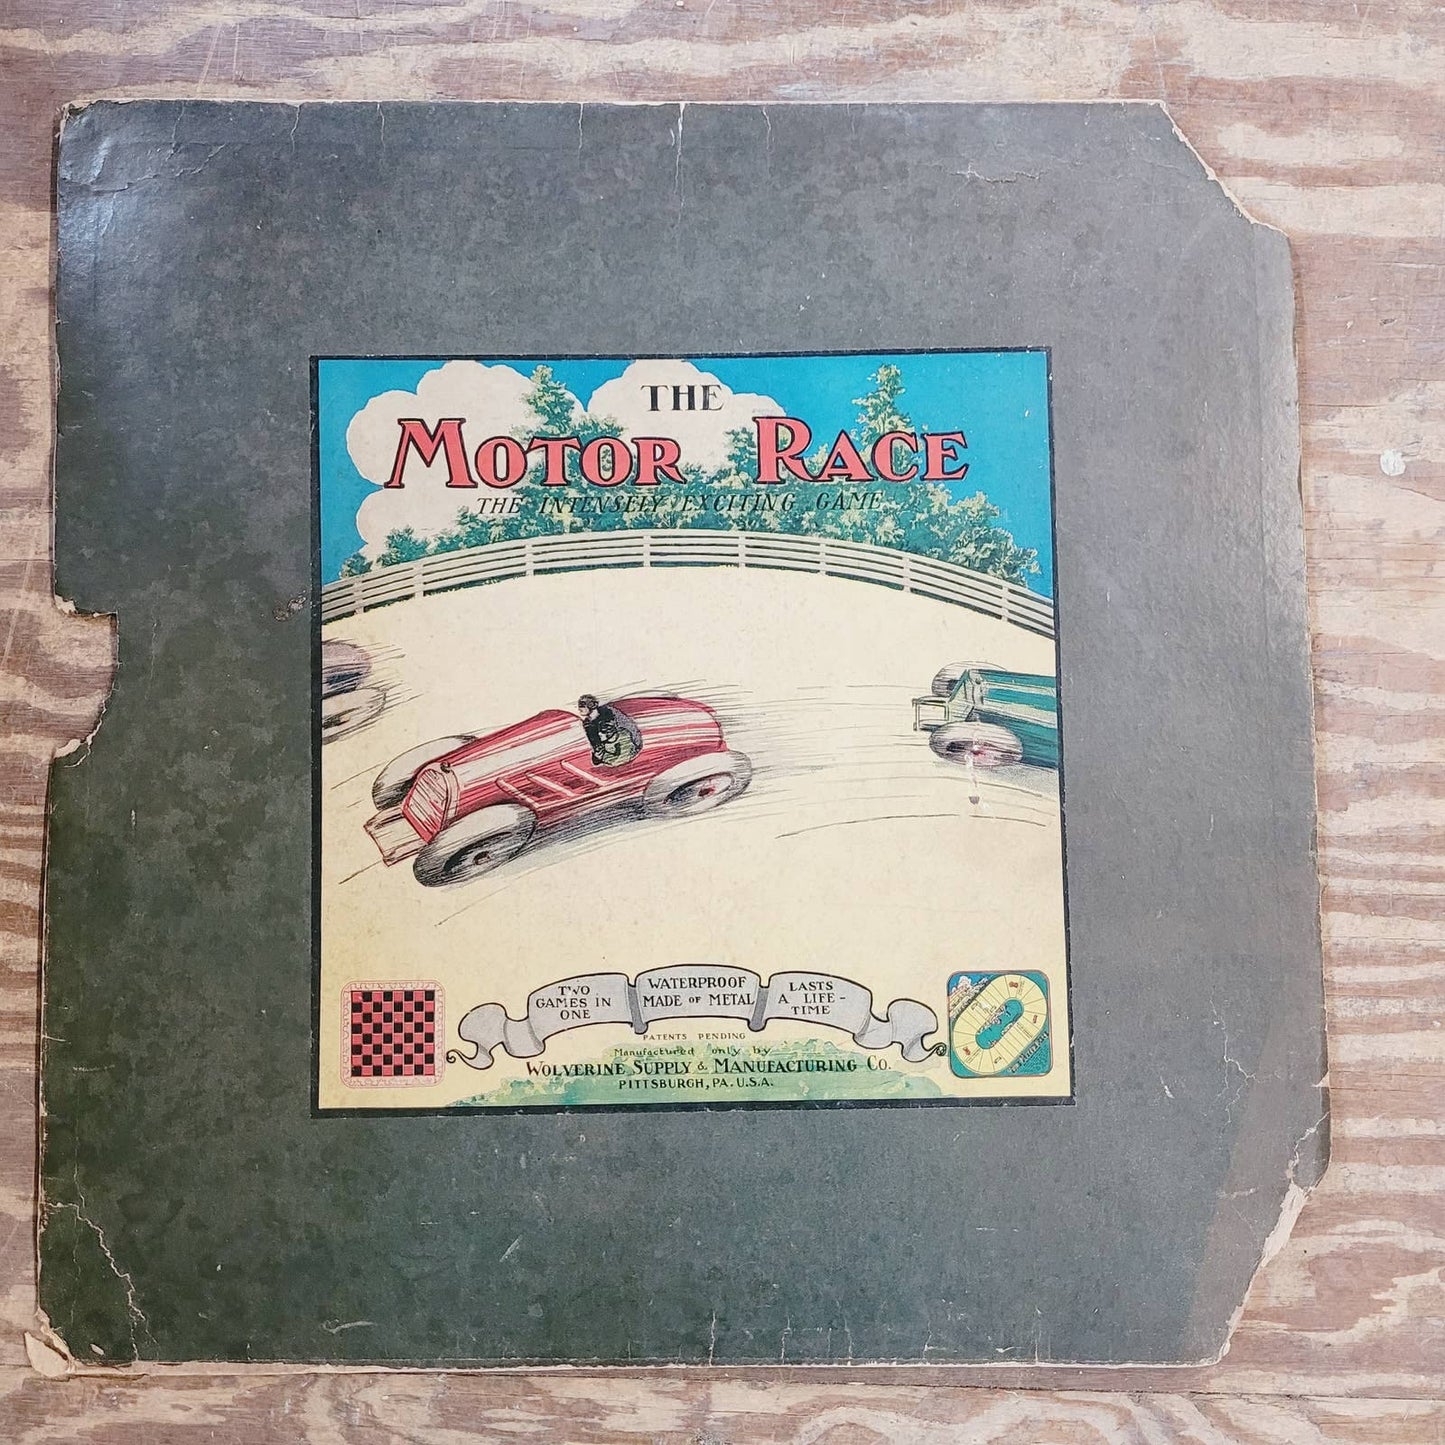 ANTIQUE 1920's THE MOTOR RACE GAME METAL BOARD 2-in-1